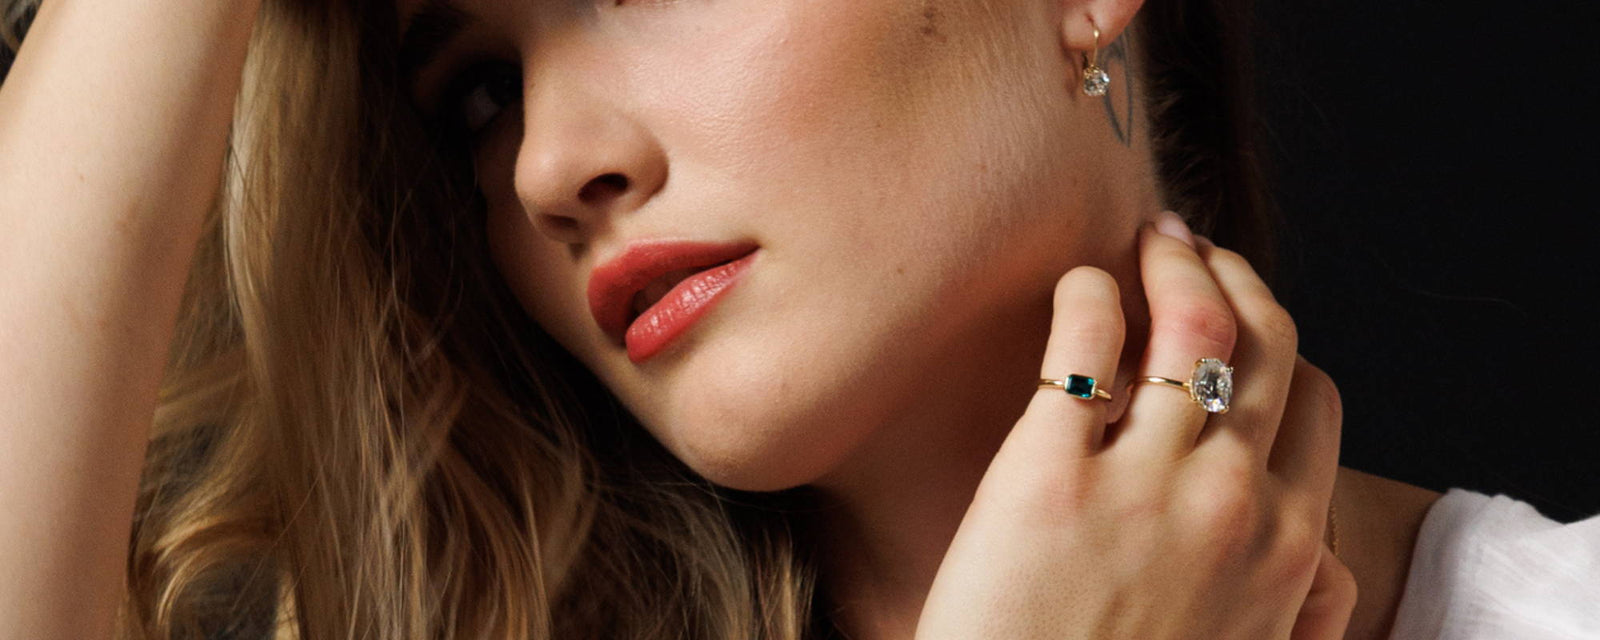 Pinky Rings Are The New Jewelry Trend You'll Want to Wear Every Day